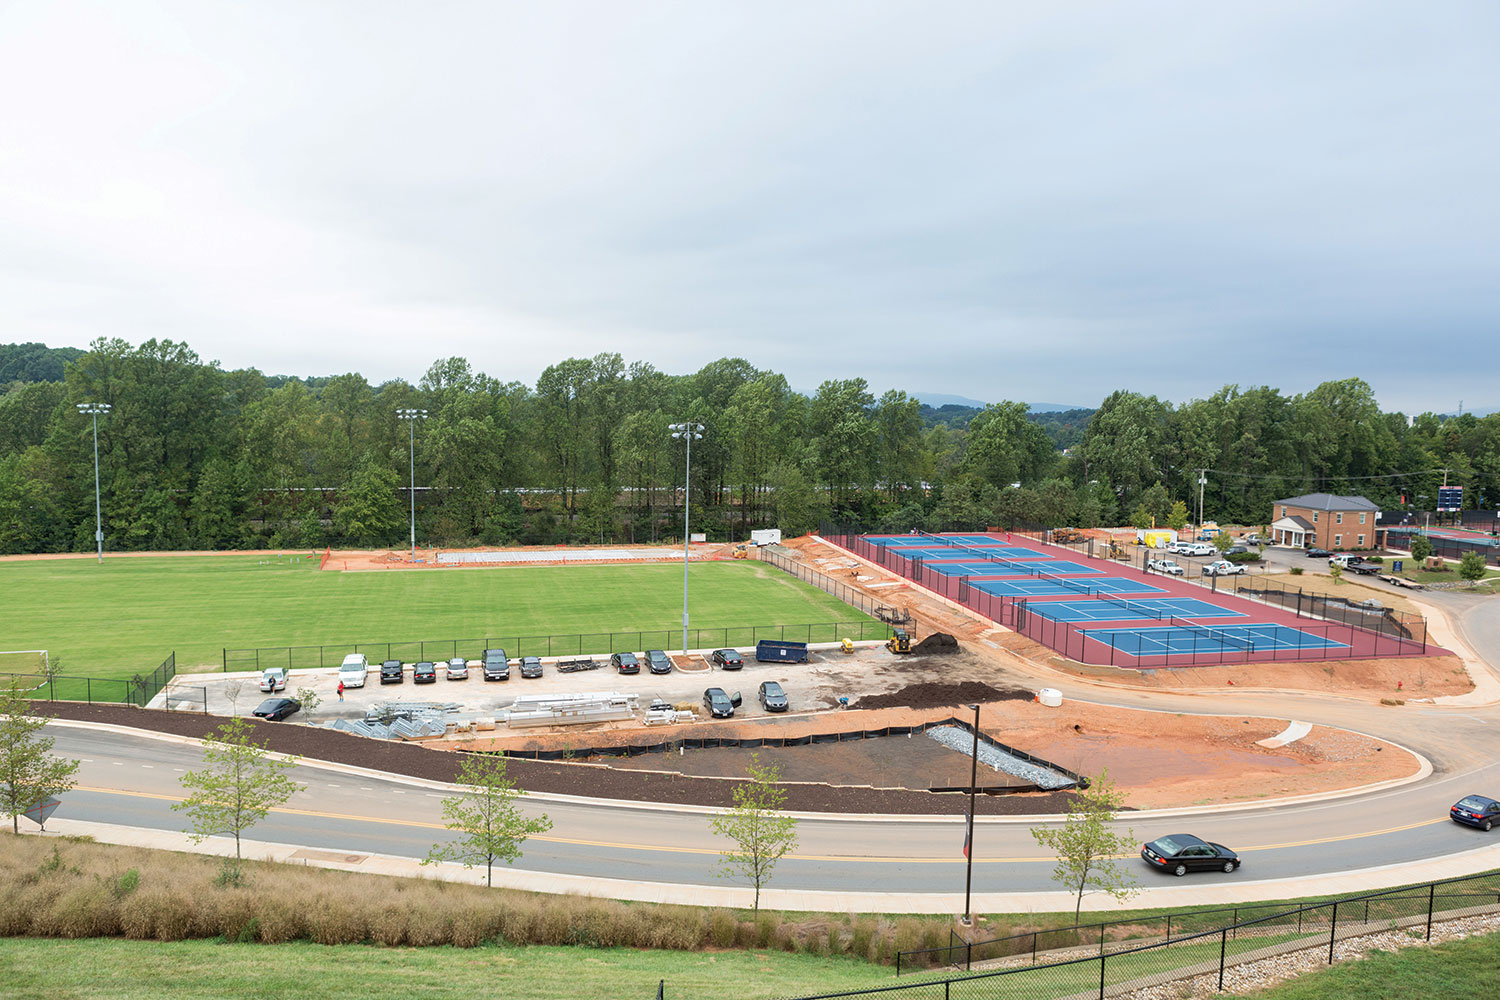 Two new practice soccer fields are next to Liberty's tennis facility, which is being upgraded.